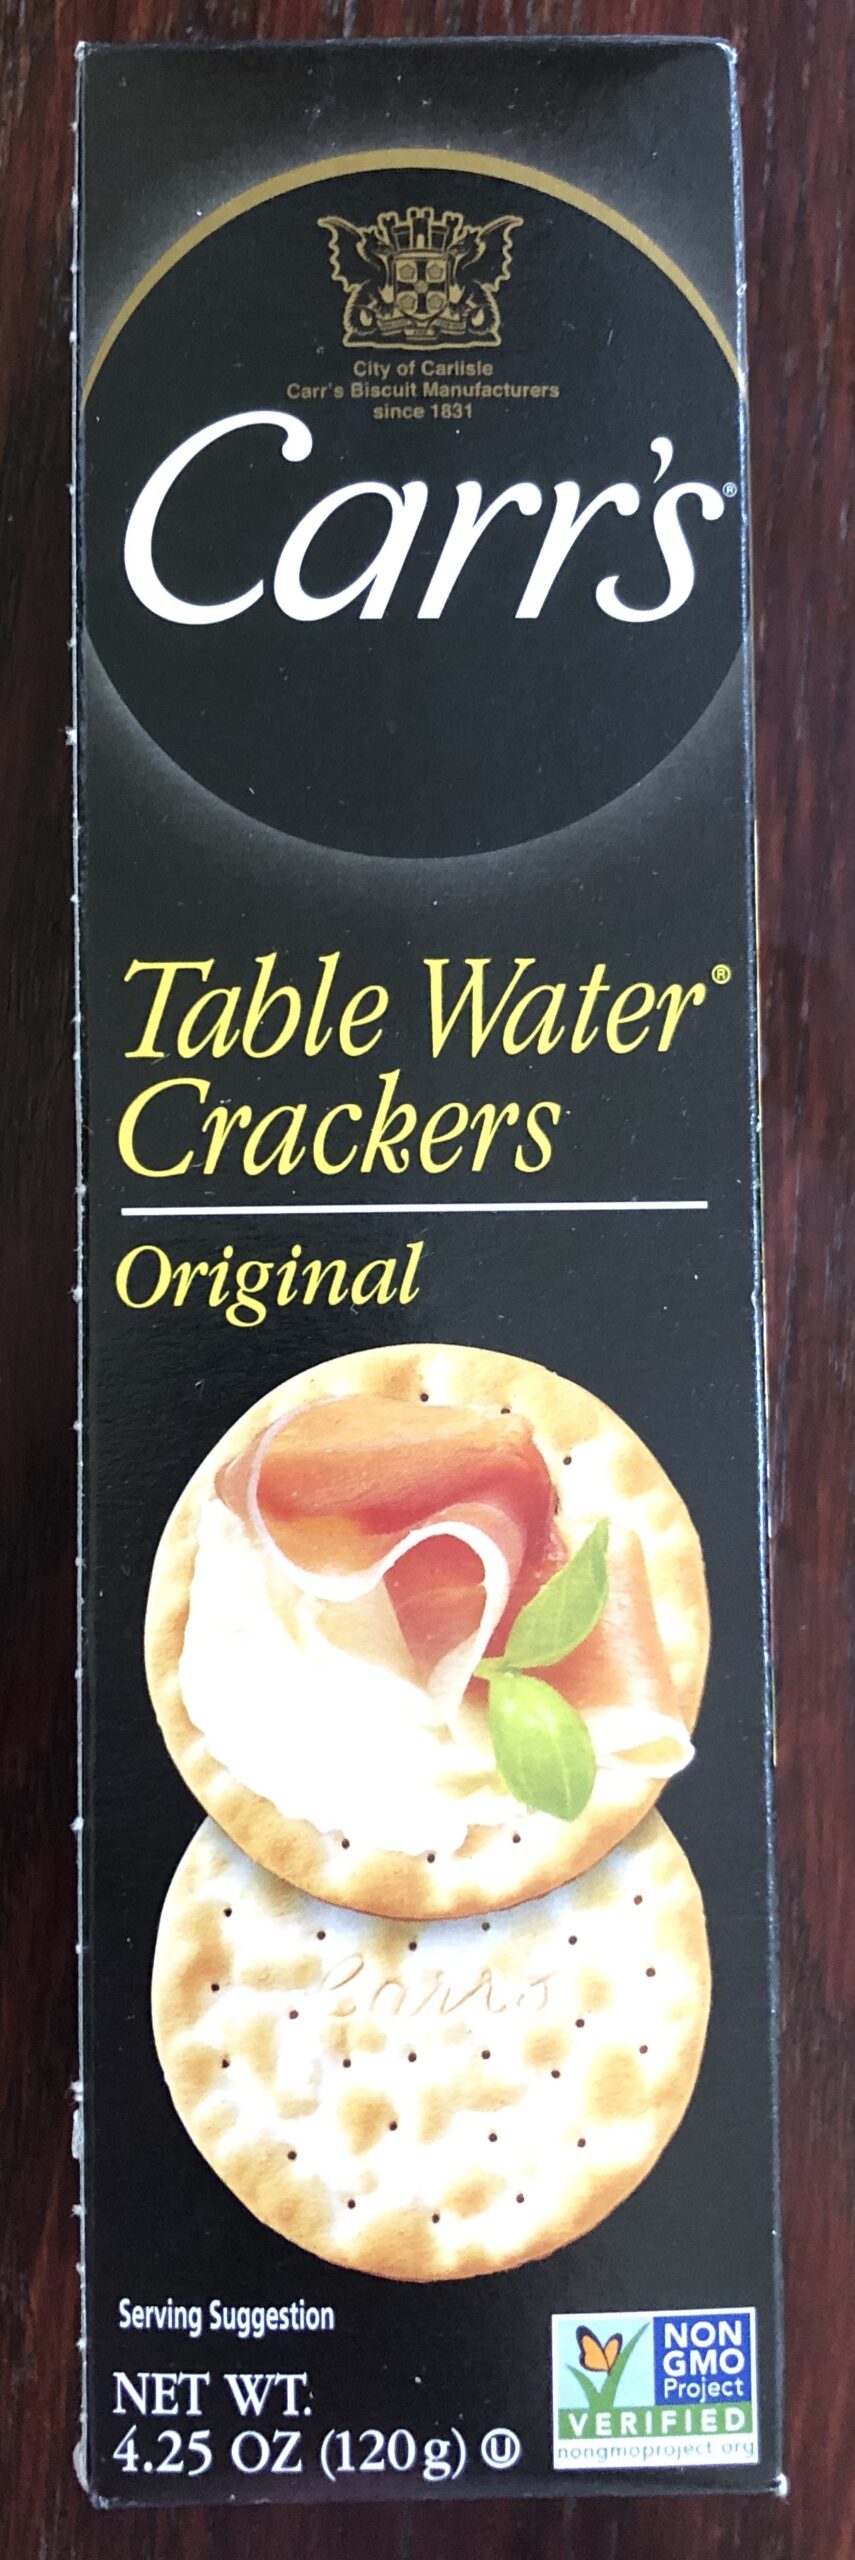 Carr's Table Water Crackers: one of the types of crackers that has norms in the TOMASS test